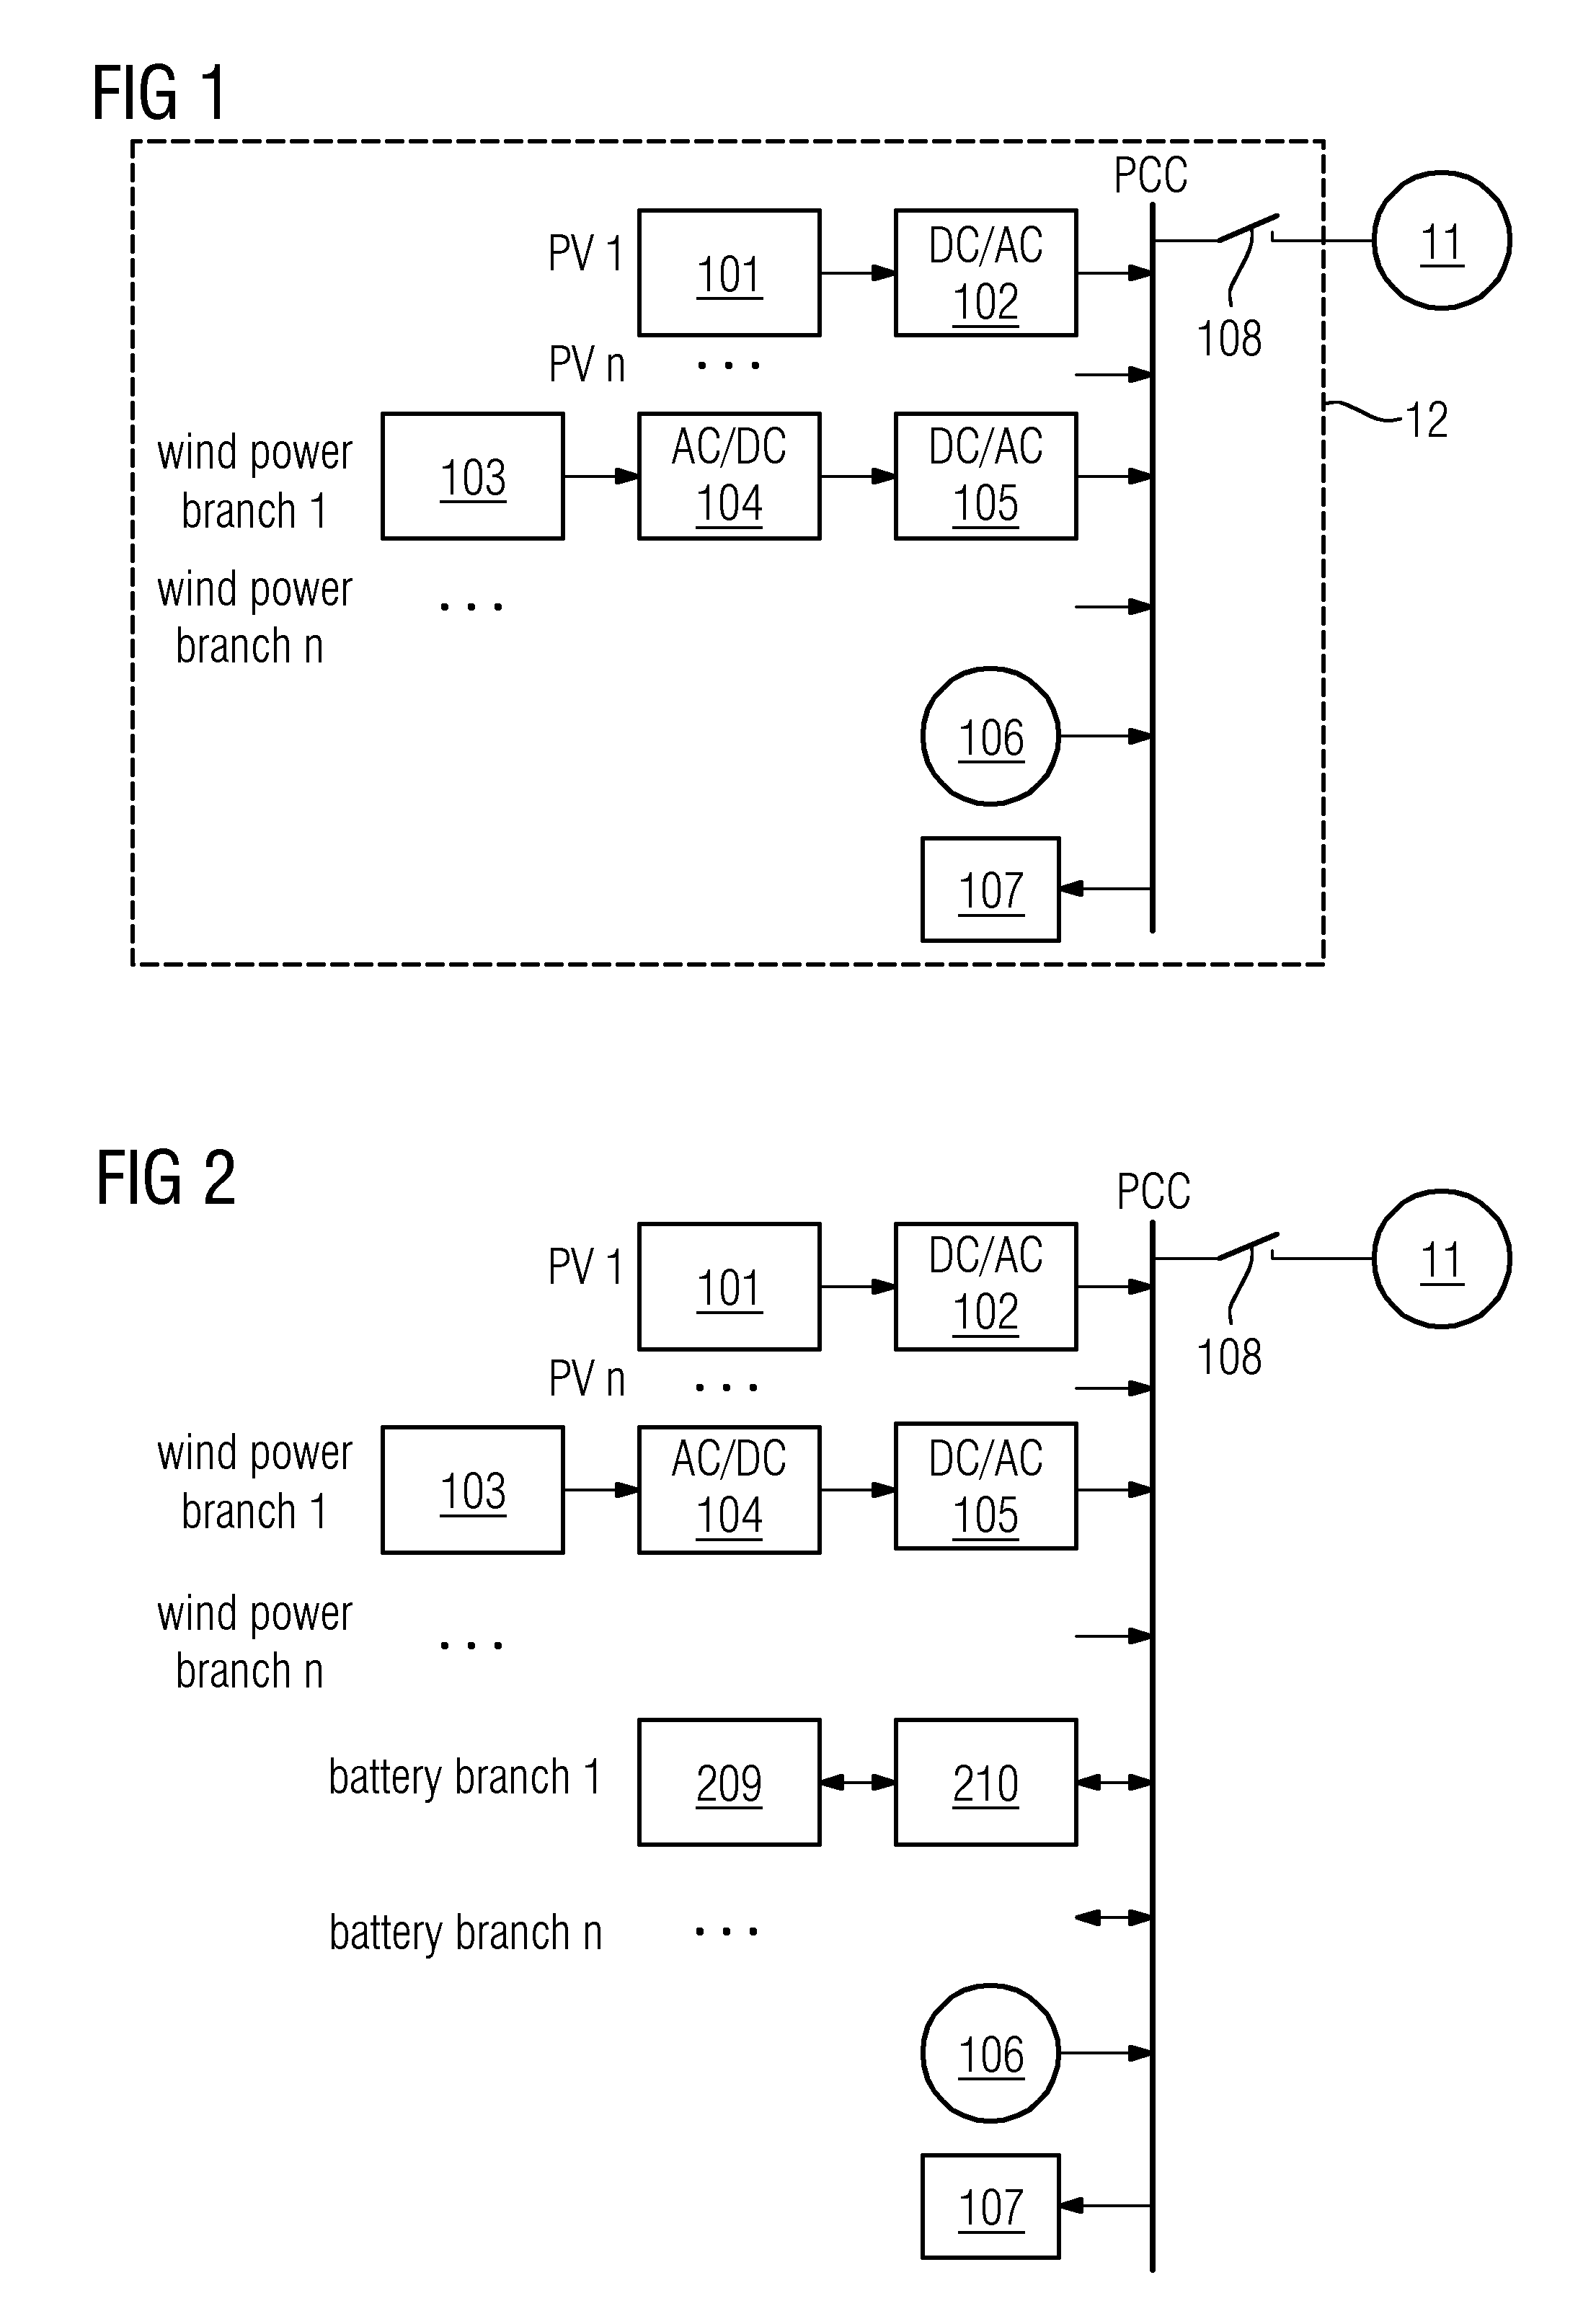 Power generation unit driver, power generation unit and energy output equipment in power grid